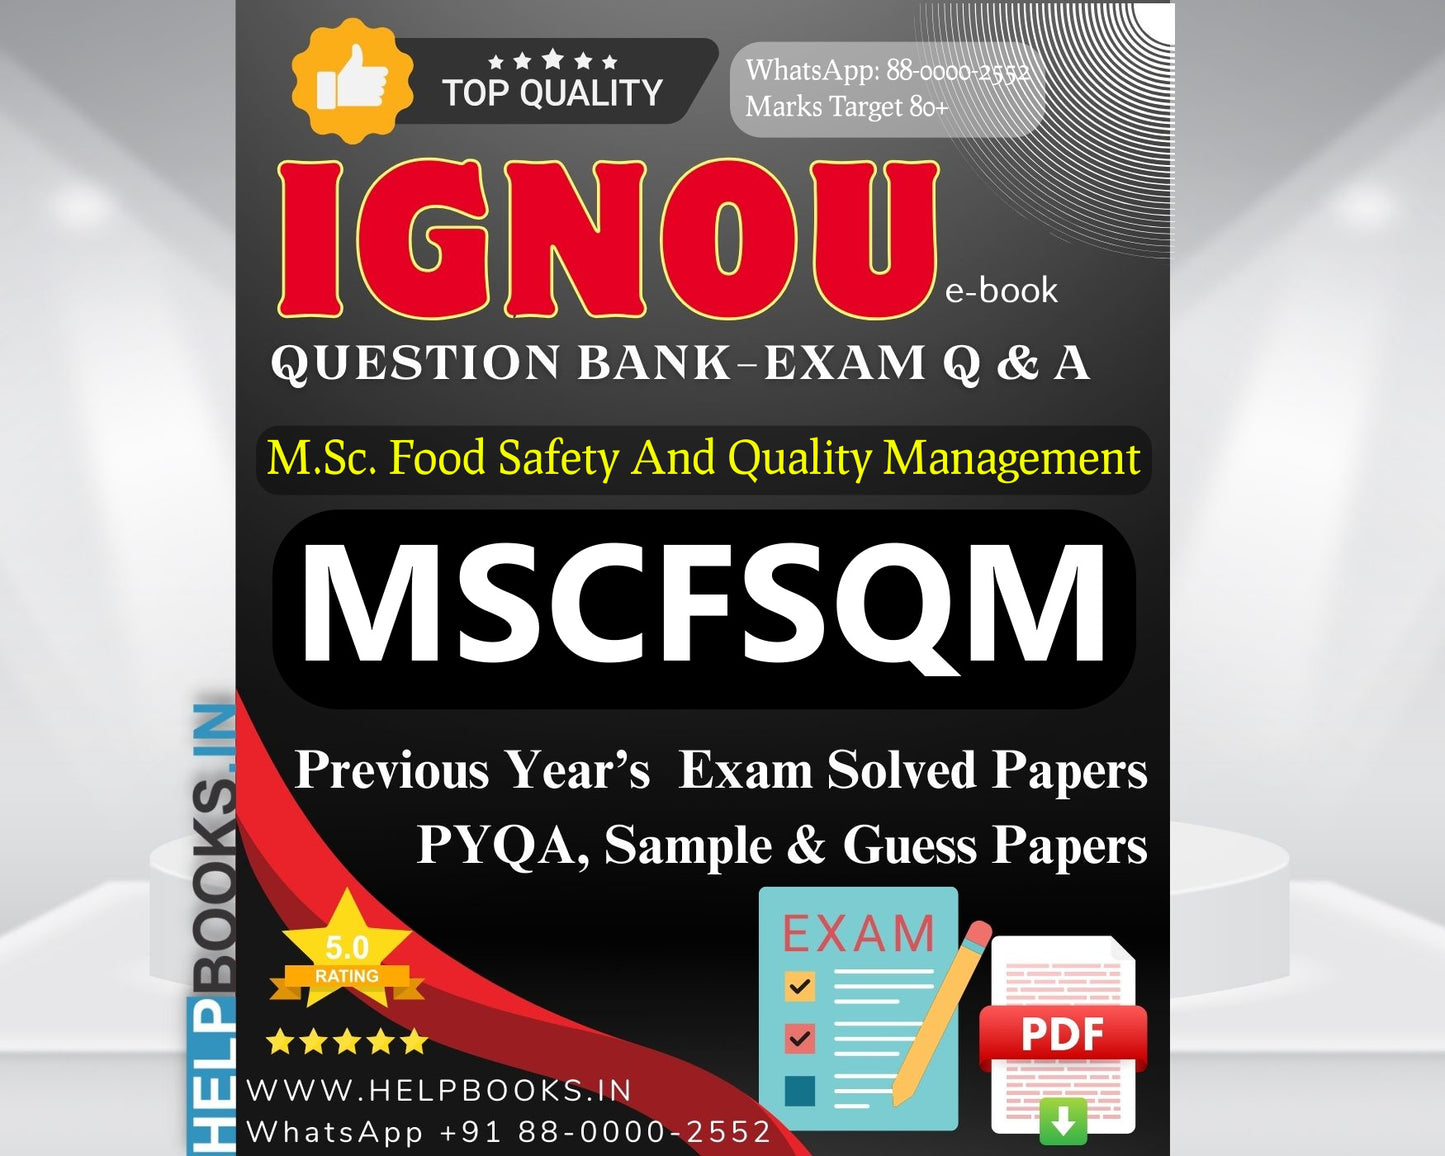 MSCFSQM IGNOU Exam Combo of 10 Solved Papers: 5 Previous Years' Solved Papers & 5 Sample Guess Papers for Master of Science in Food Safety and Quality Management